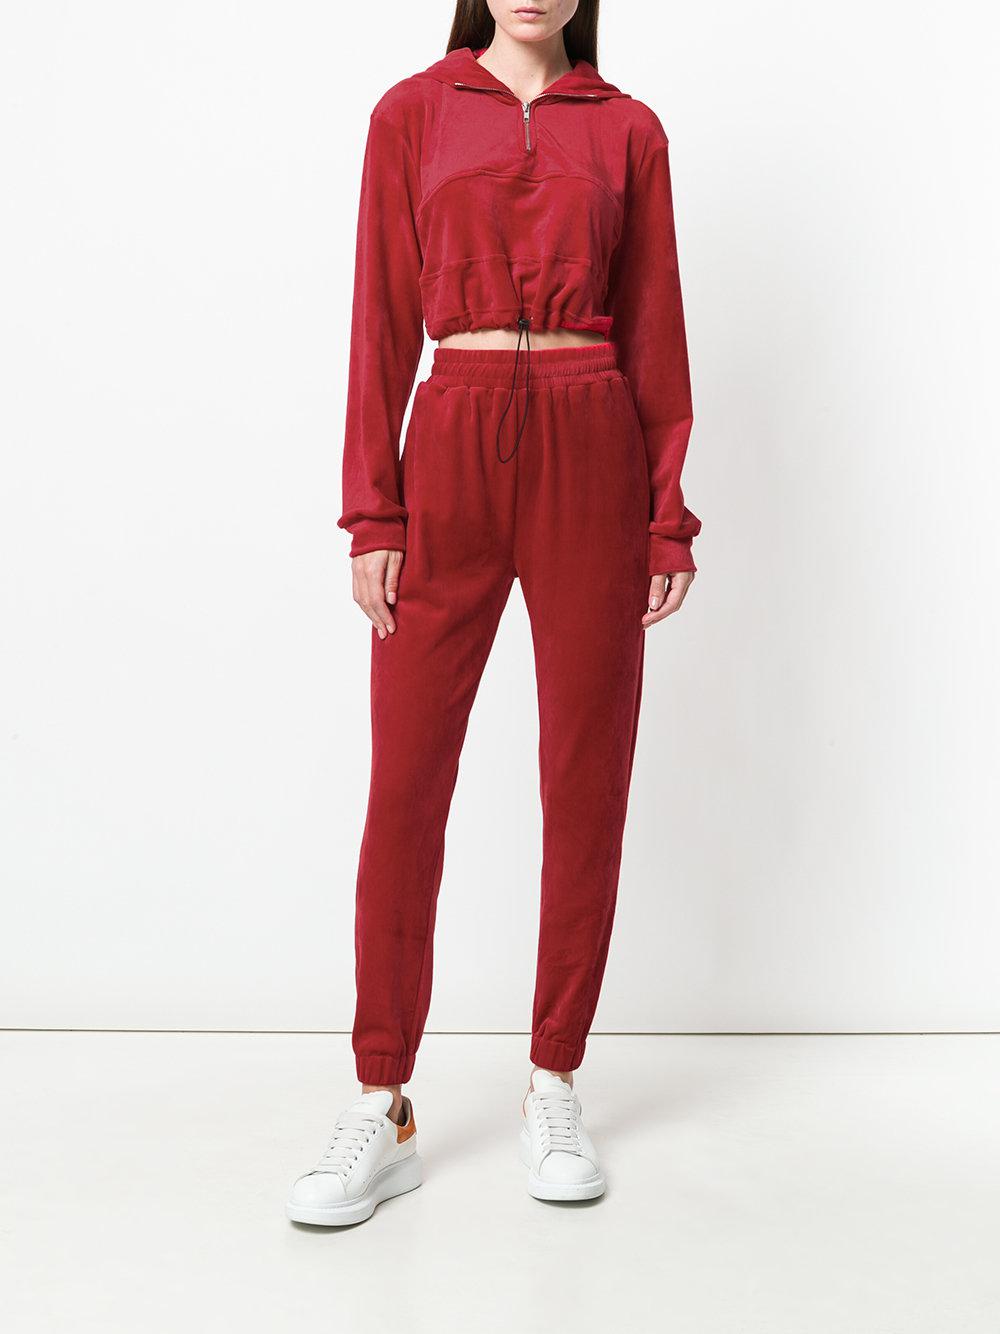 Danielle Guizio Synthetic Velour Tracksuit in Red - Lyst